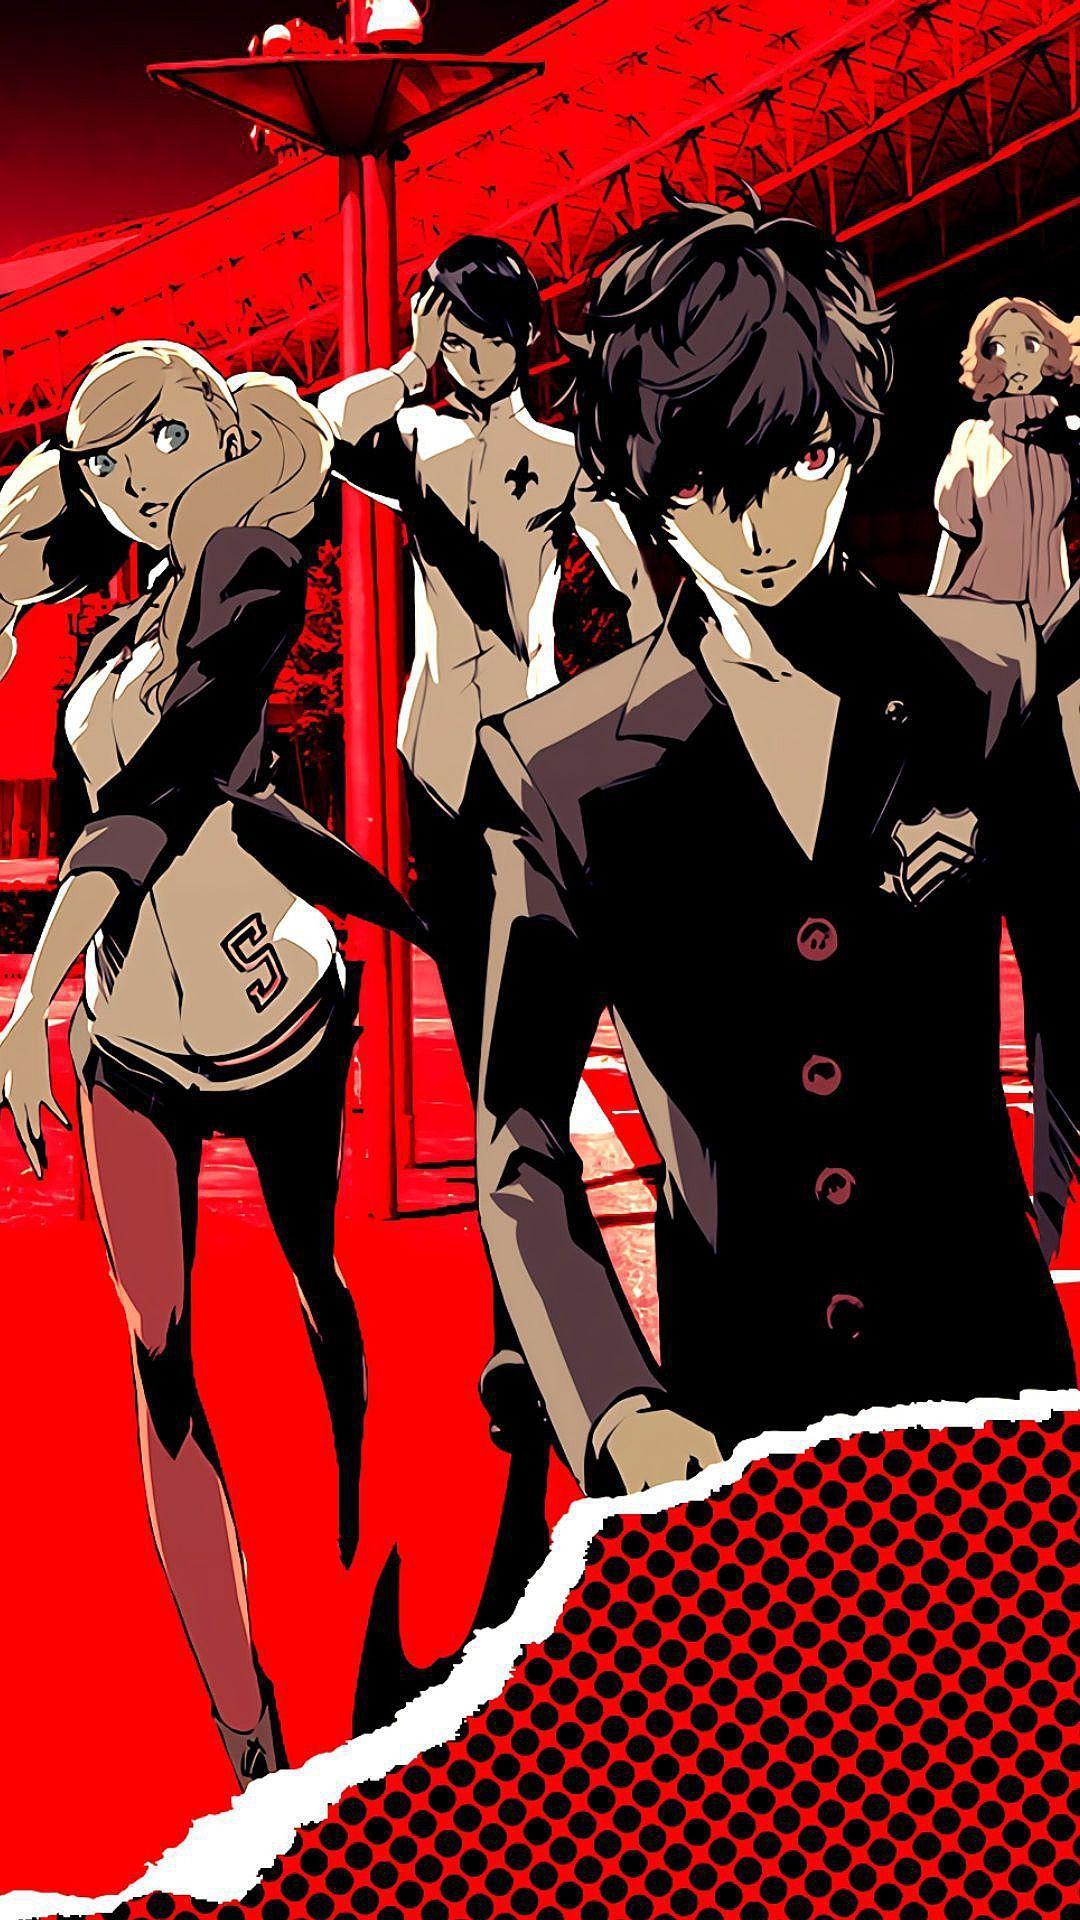 1080 x 1920 · jpeg - Persona 5 | iPhone Wallpapers